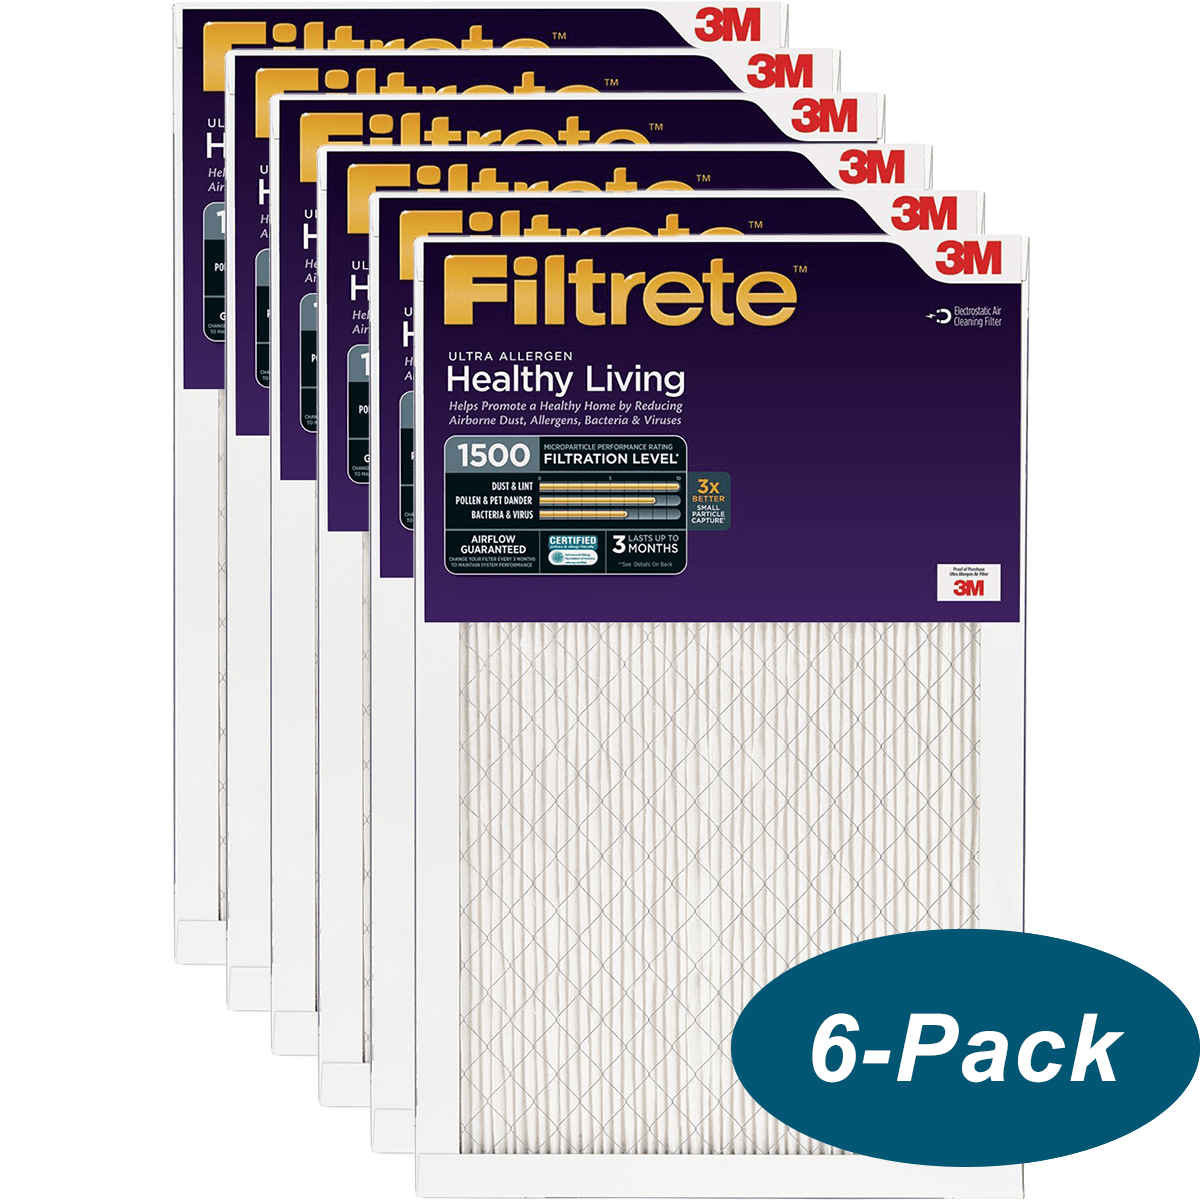 Filtrete Healthy Living 1500 MPR Ultra Allergen Reduction Filters 16x25x1 6-PACK